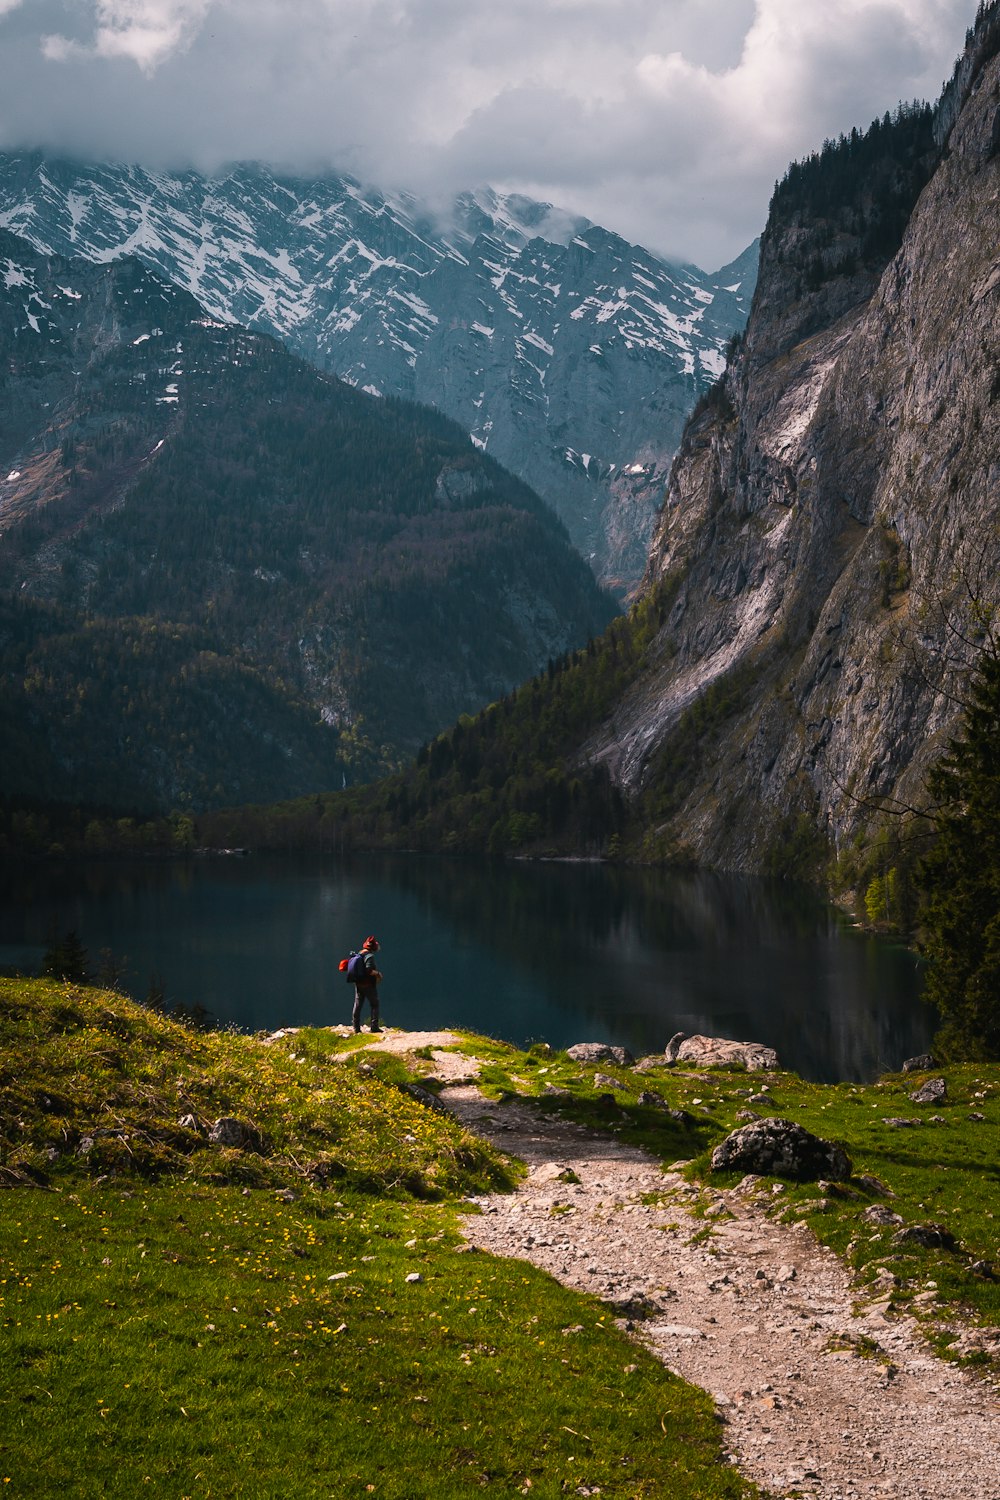 a person standing on a trail by a lake with mountains in the background